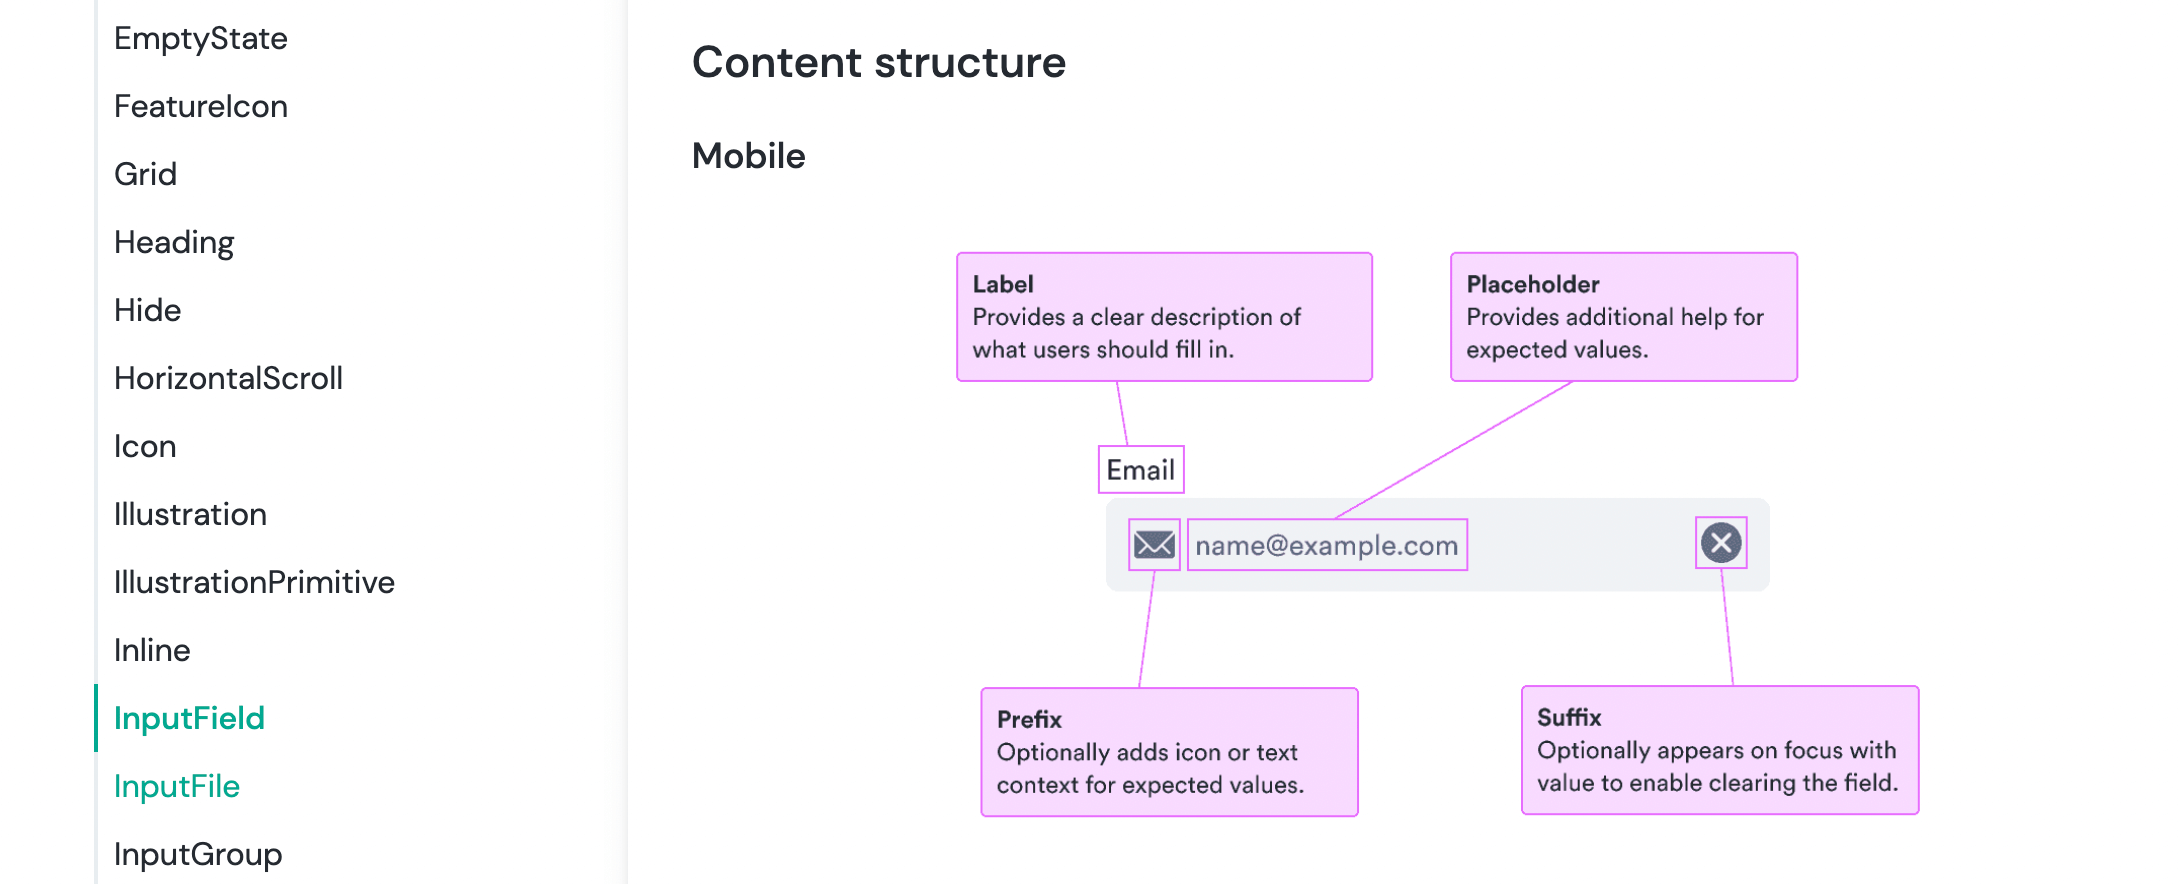 Screenshot of Kiwi.com’s design system, where content structure for the input field is shown.